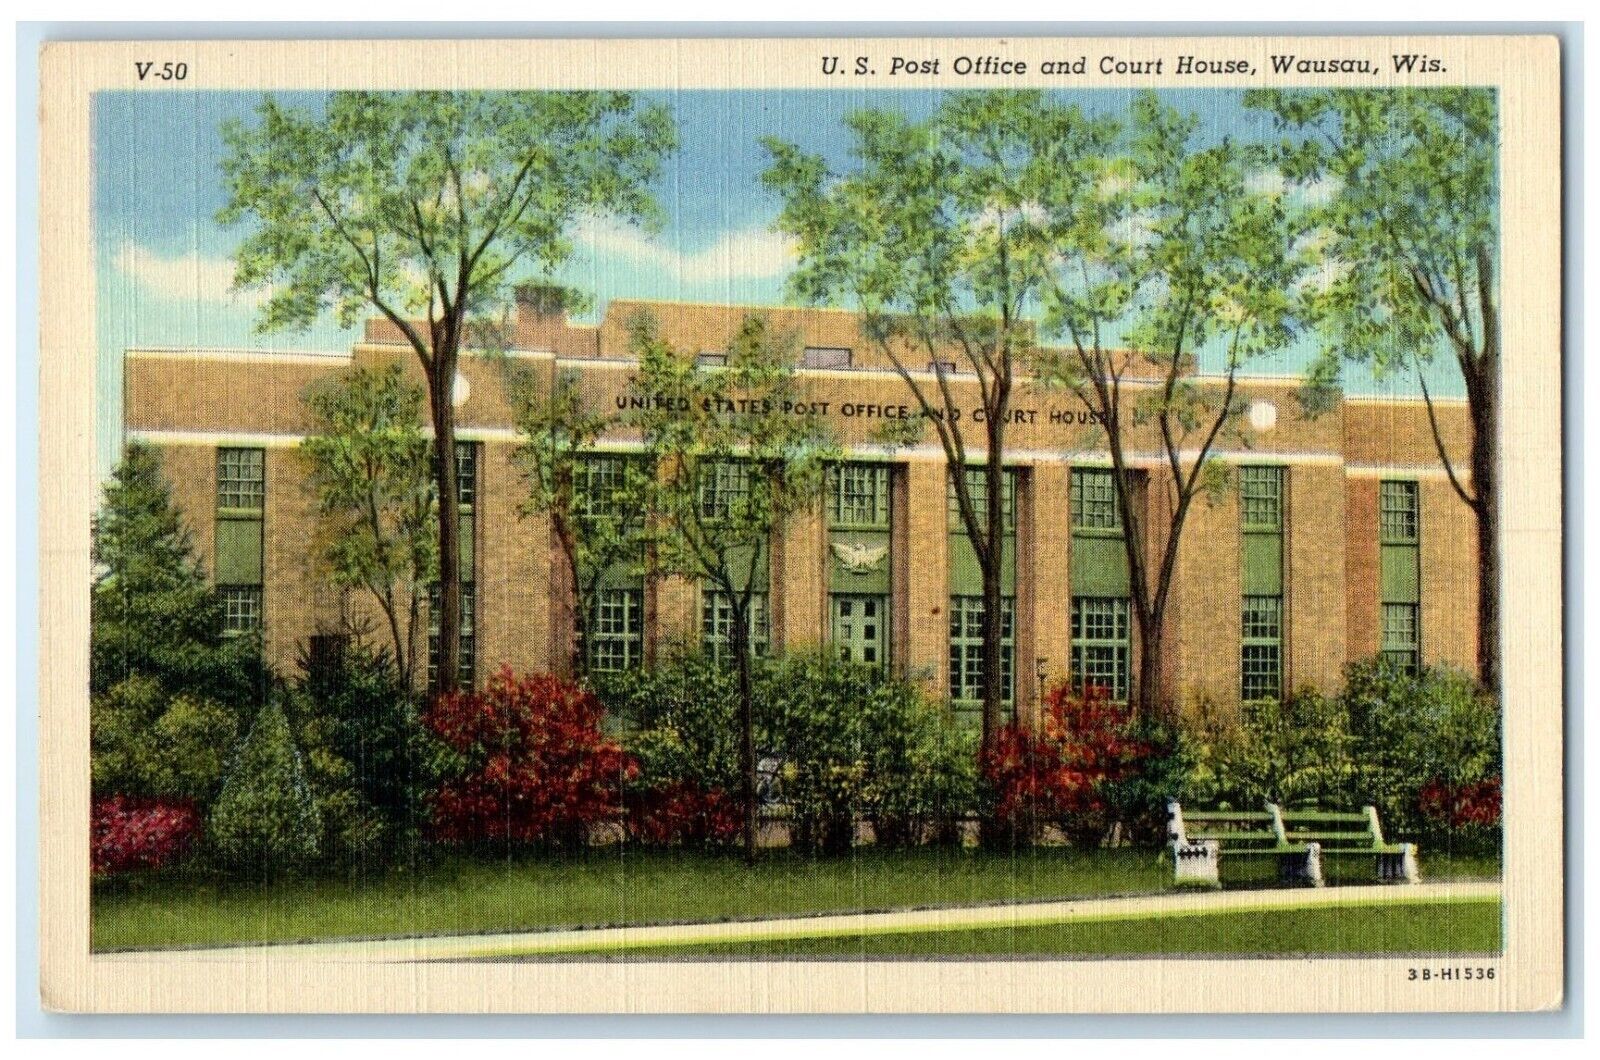 c1946 United States Post Office Court House Wausau Wisconsin WI Vintage Postcard